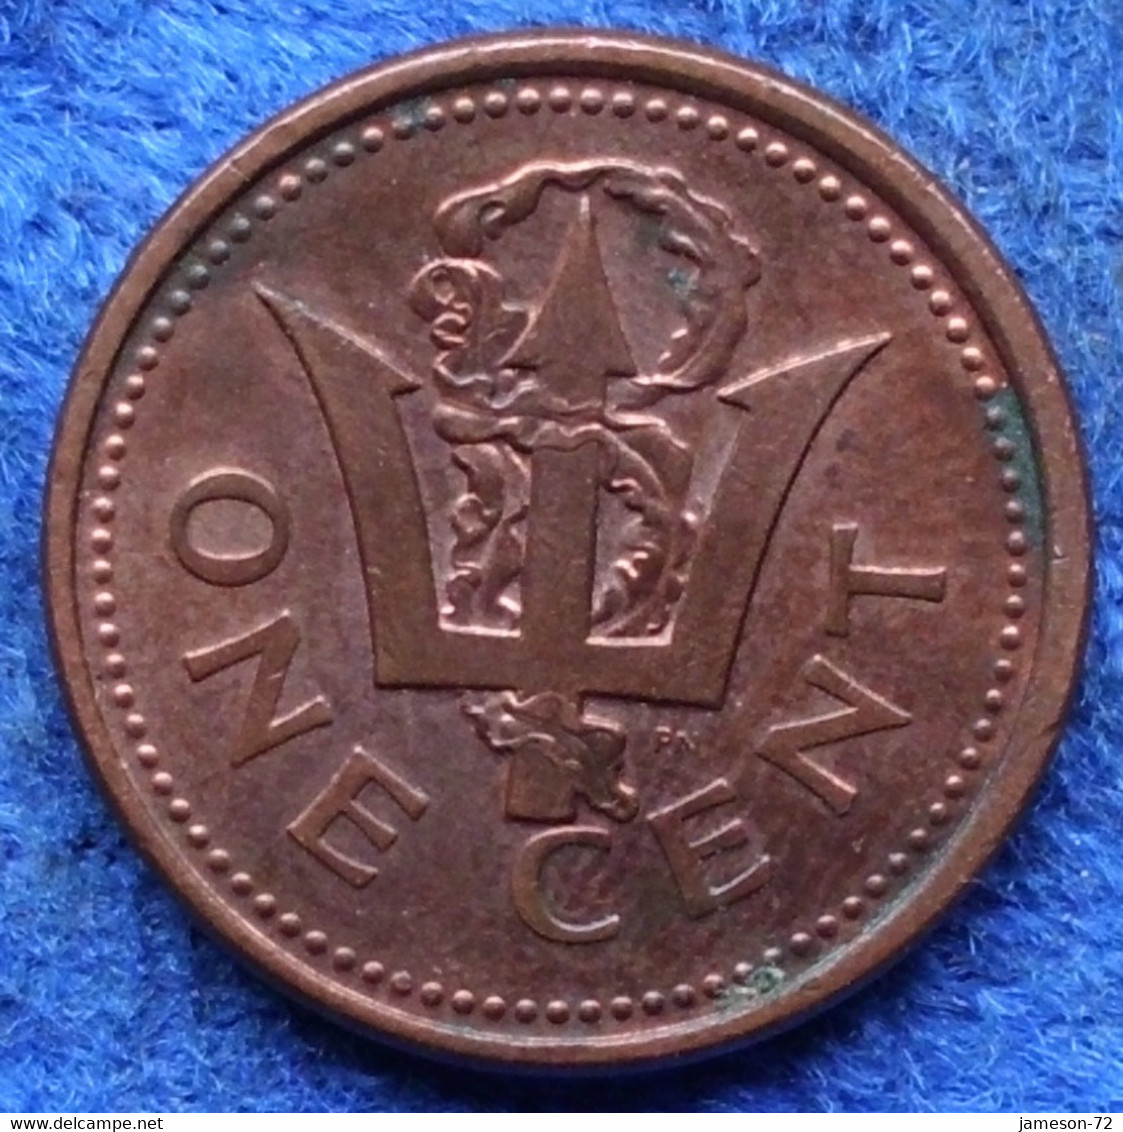 BARBADOS - 1 Cent 2005 KM#10a Commonwealth Independent (1966) - Edelweiss Coins - Barbades